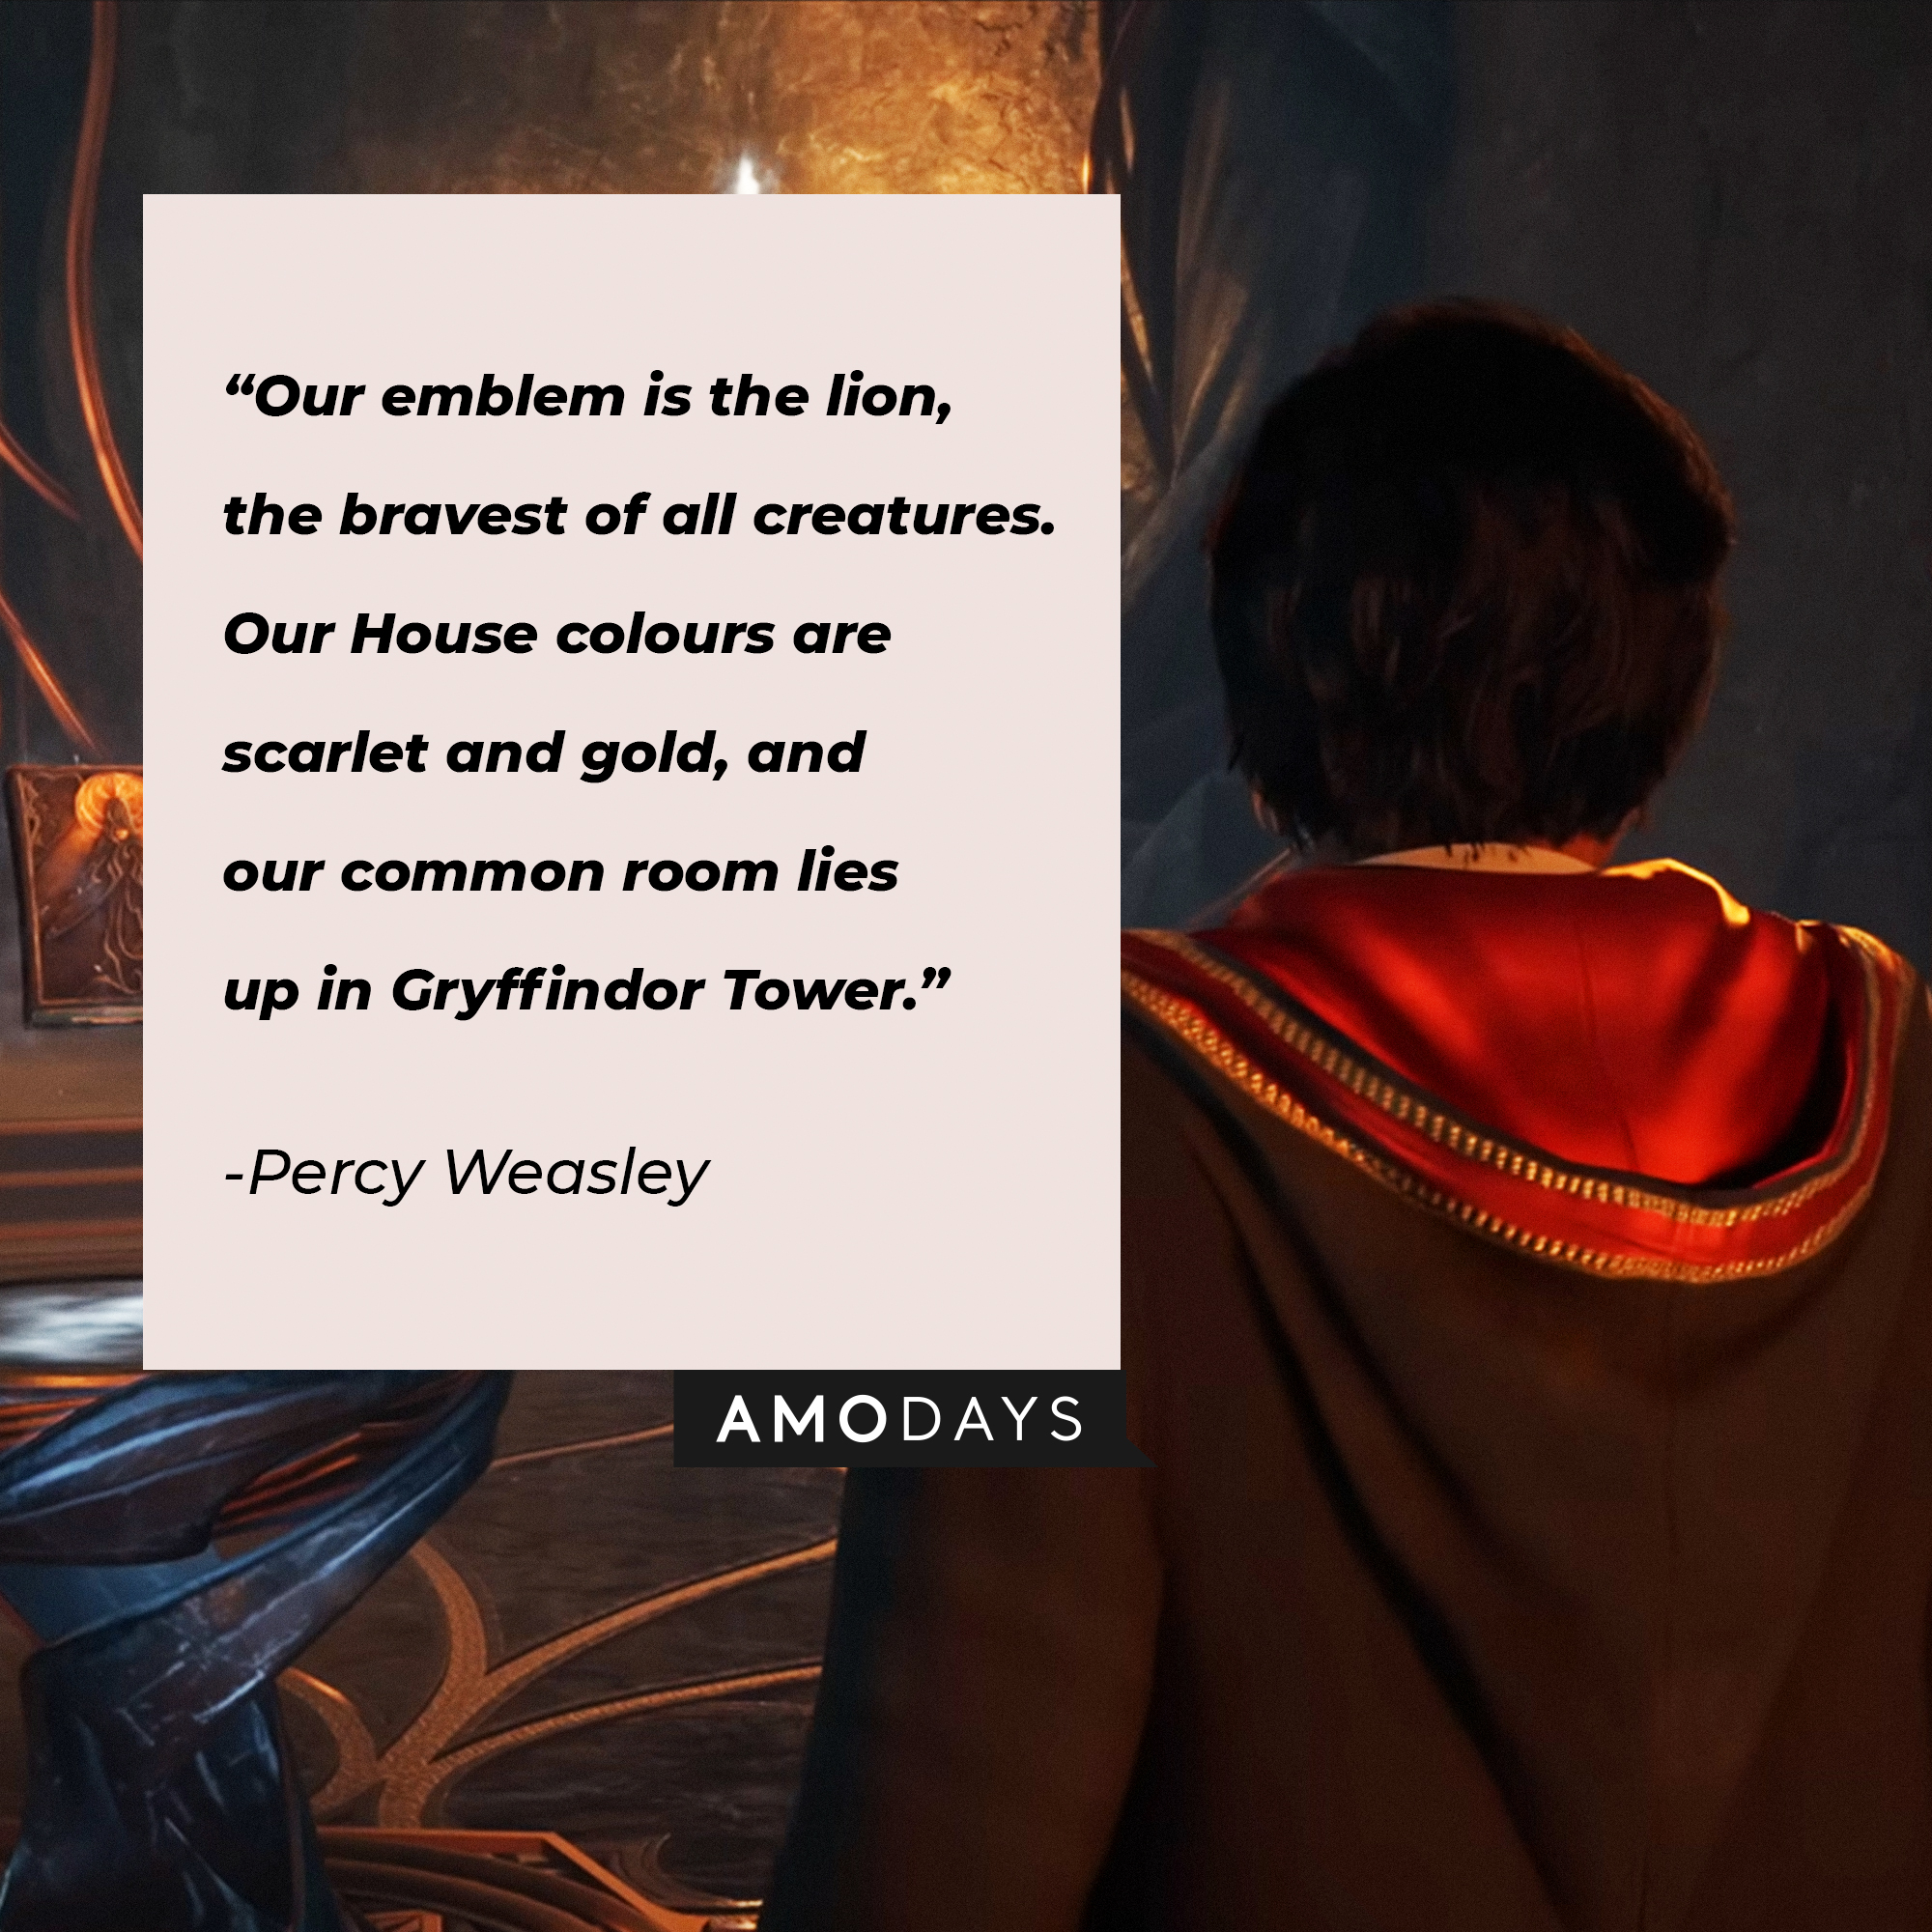 Percy Weasley's quote: "Our emblem is the lion, the bravest of all creatures. Our House colours are scarlet and gold, and our common room lies up in Gryffindor Tower." | Source: Youtube.com/HogwartsLegacy